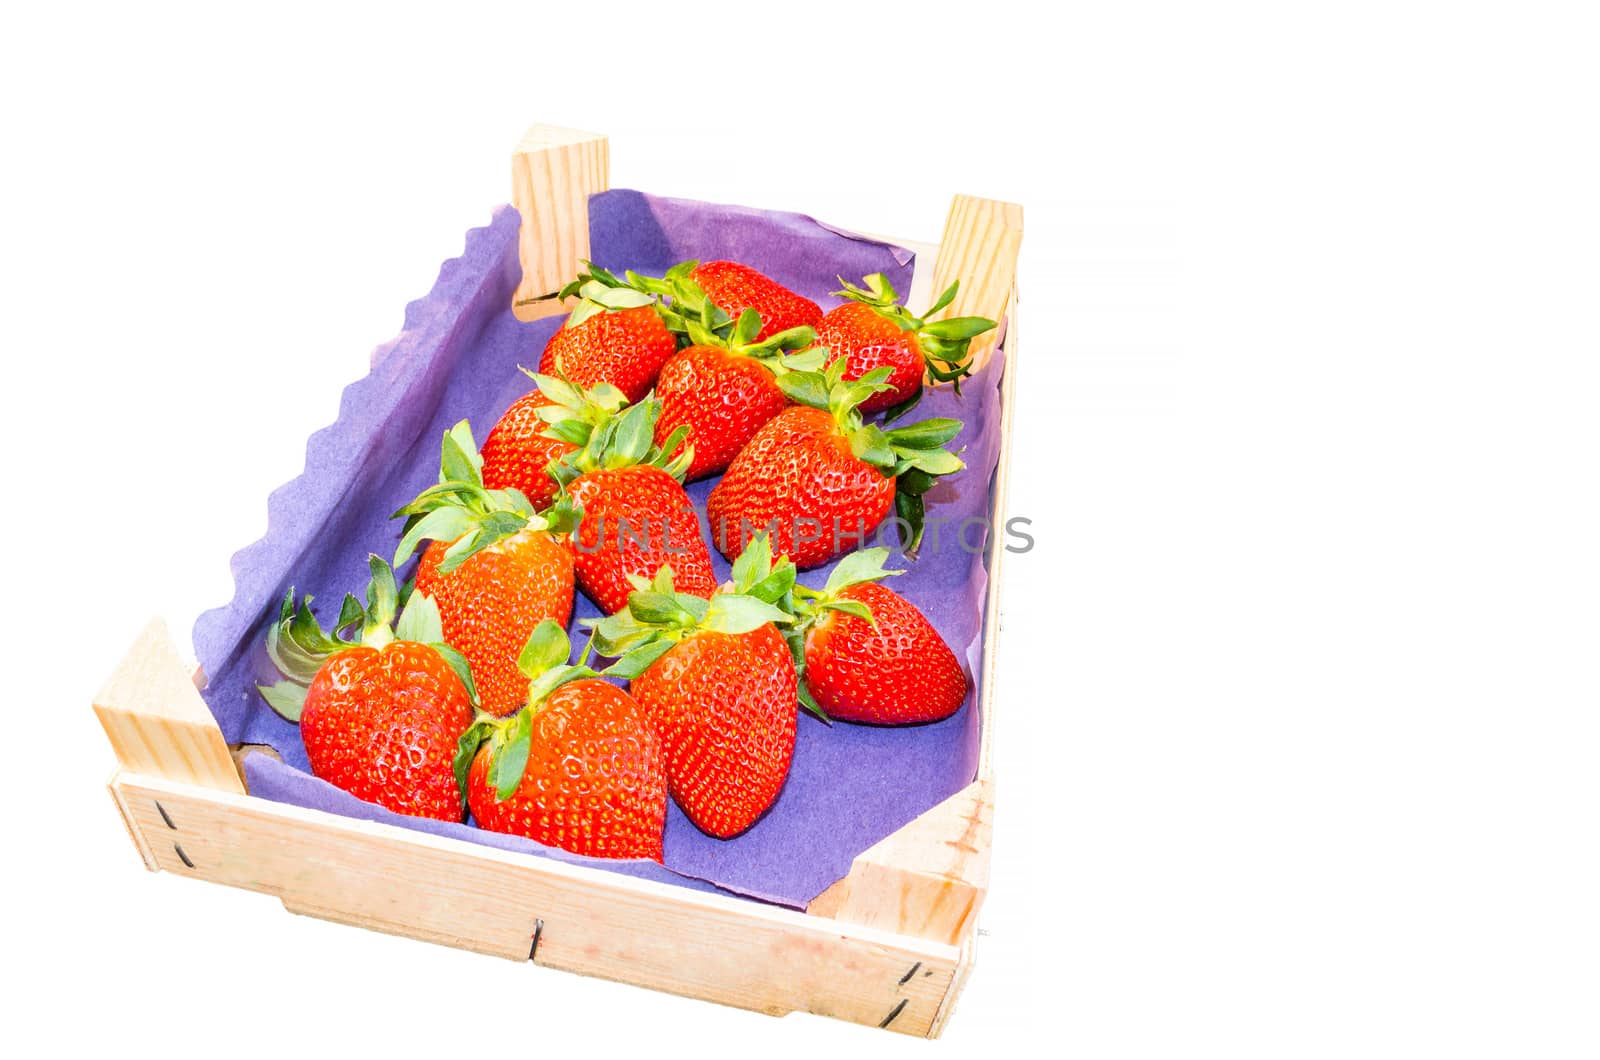 Fresh strawberries against white background in a wooden transport box.